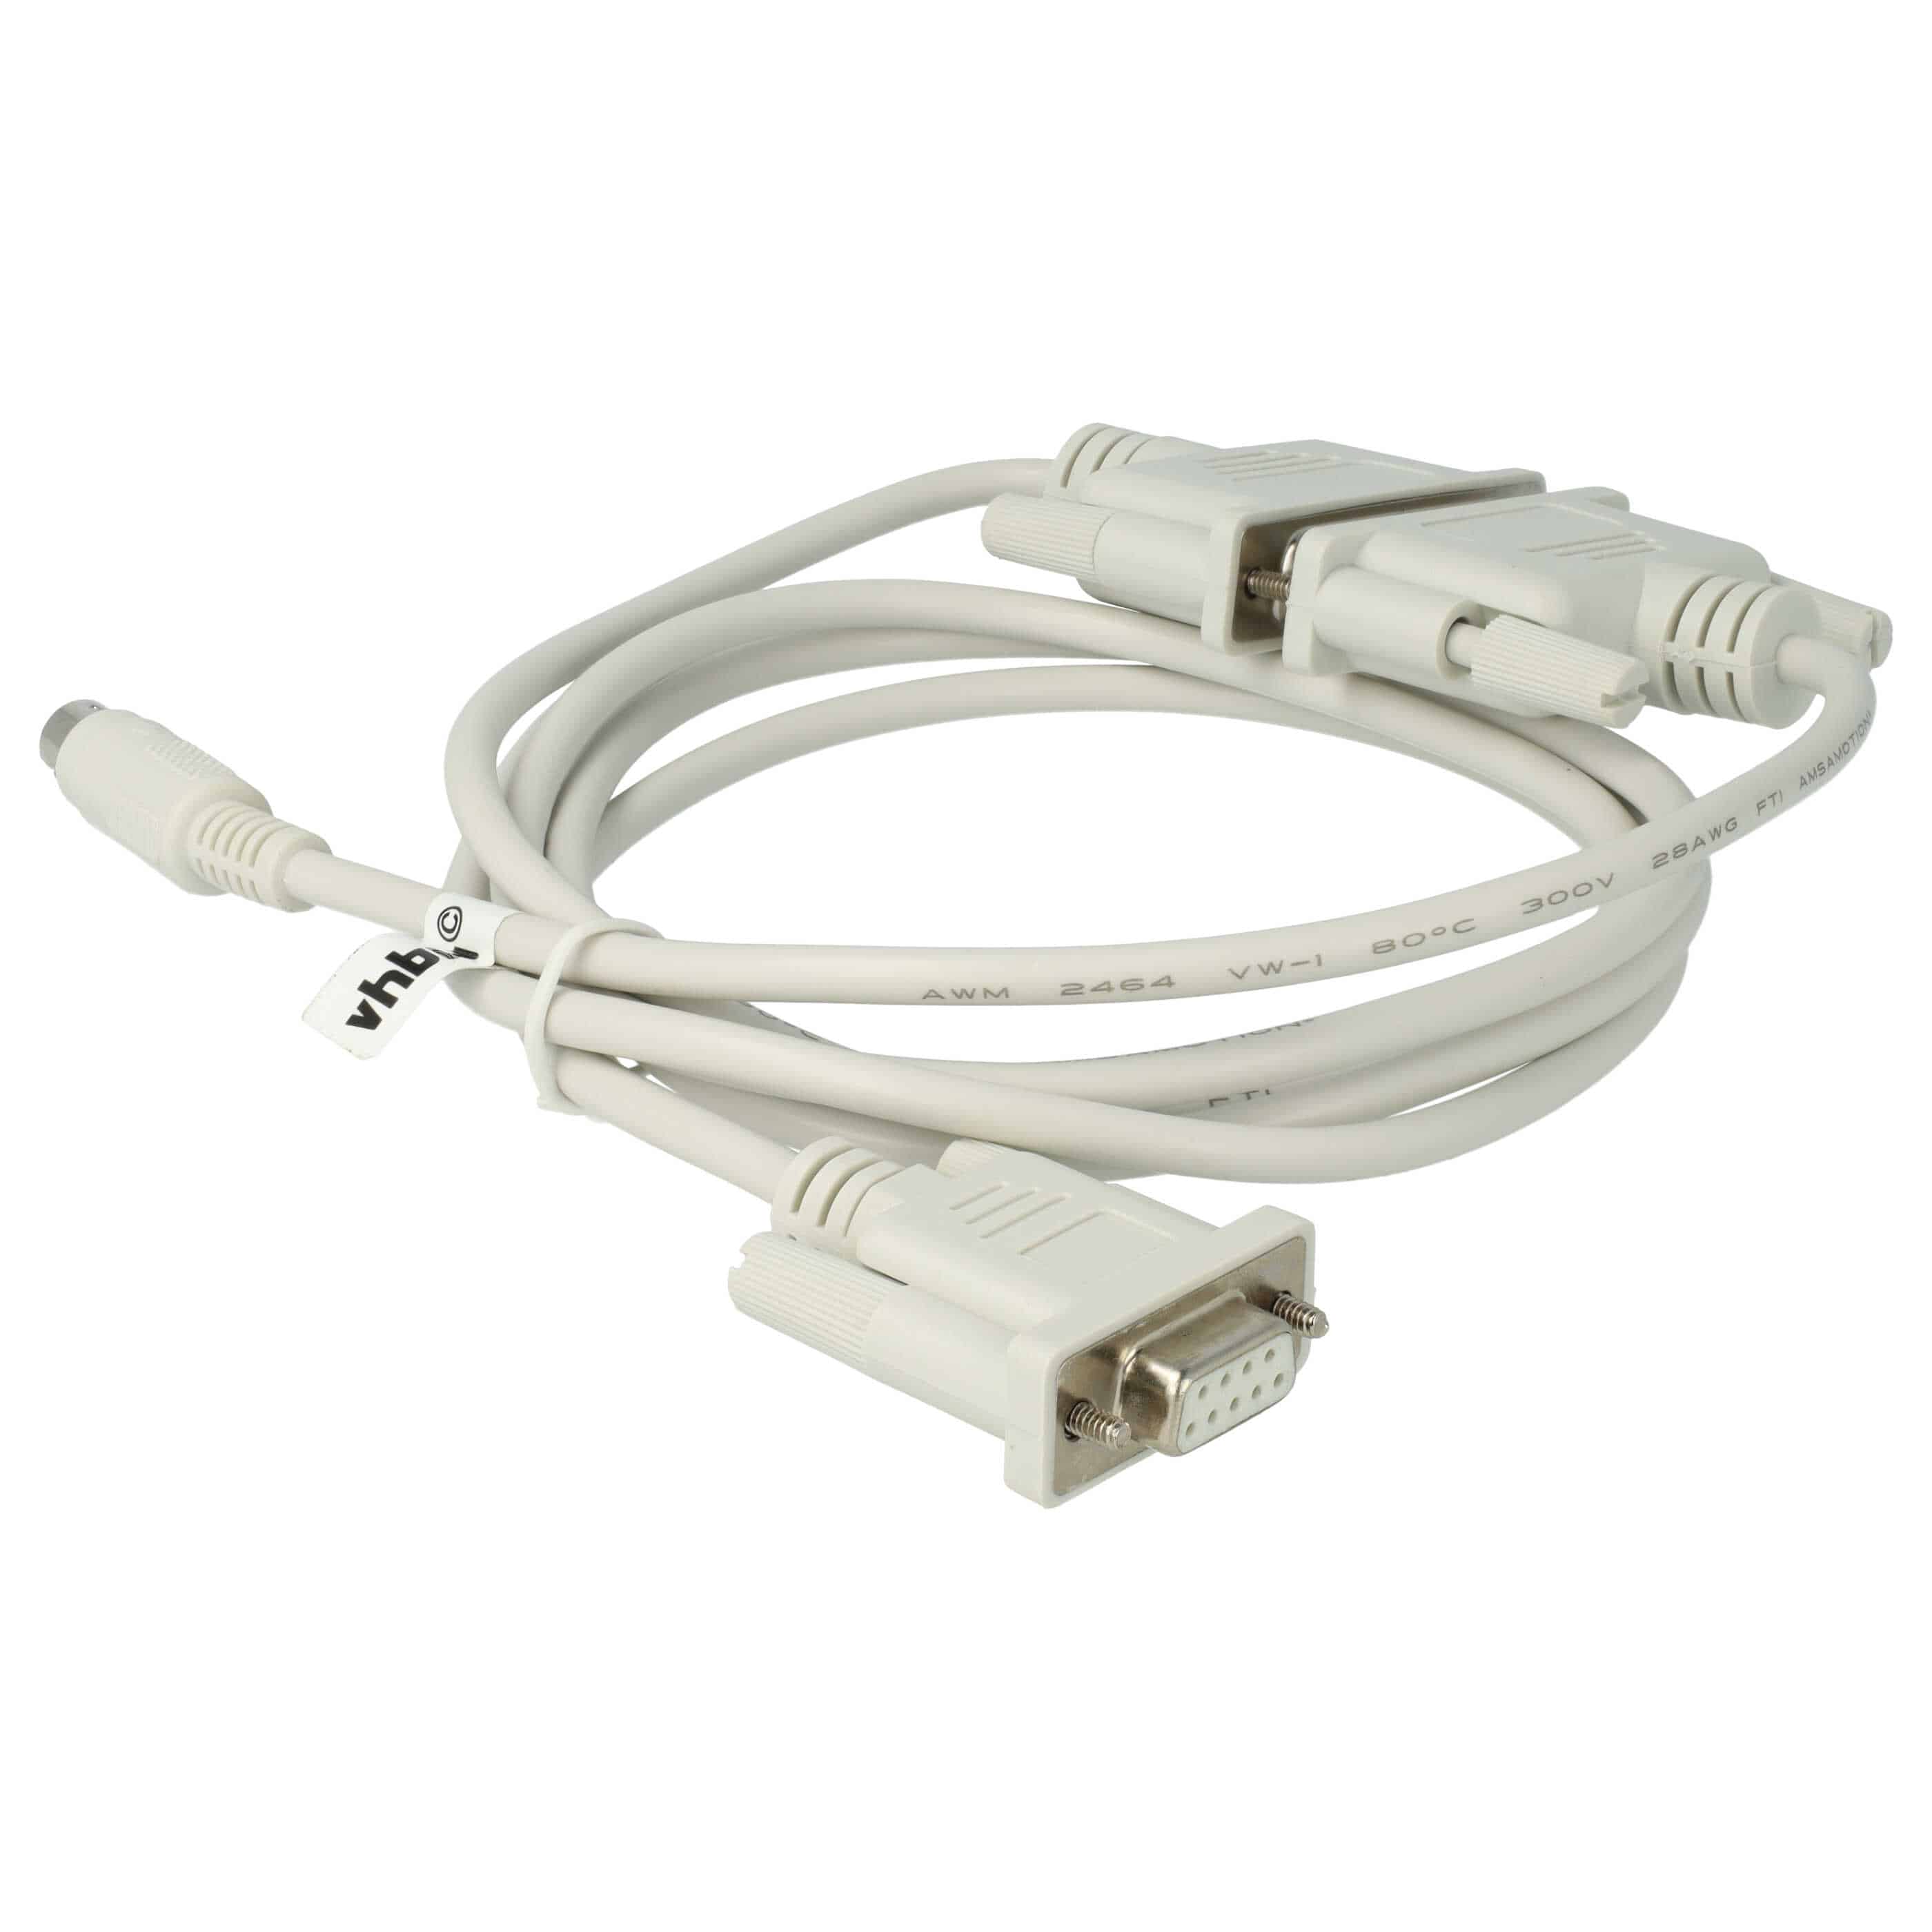 Programming Lead RS-232 suitable for Mitsubishi MELSEC FX PC & Peripherals - Adapter 200cm, Grey